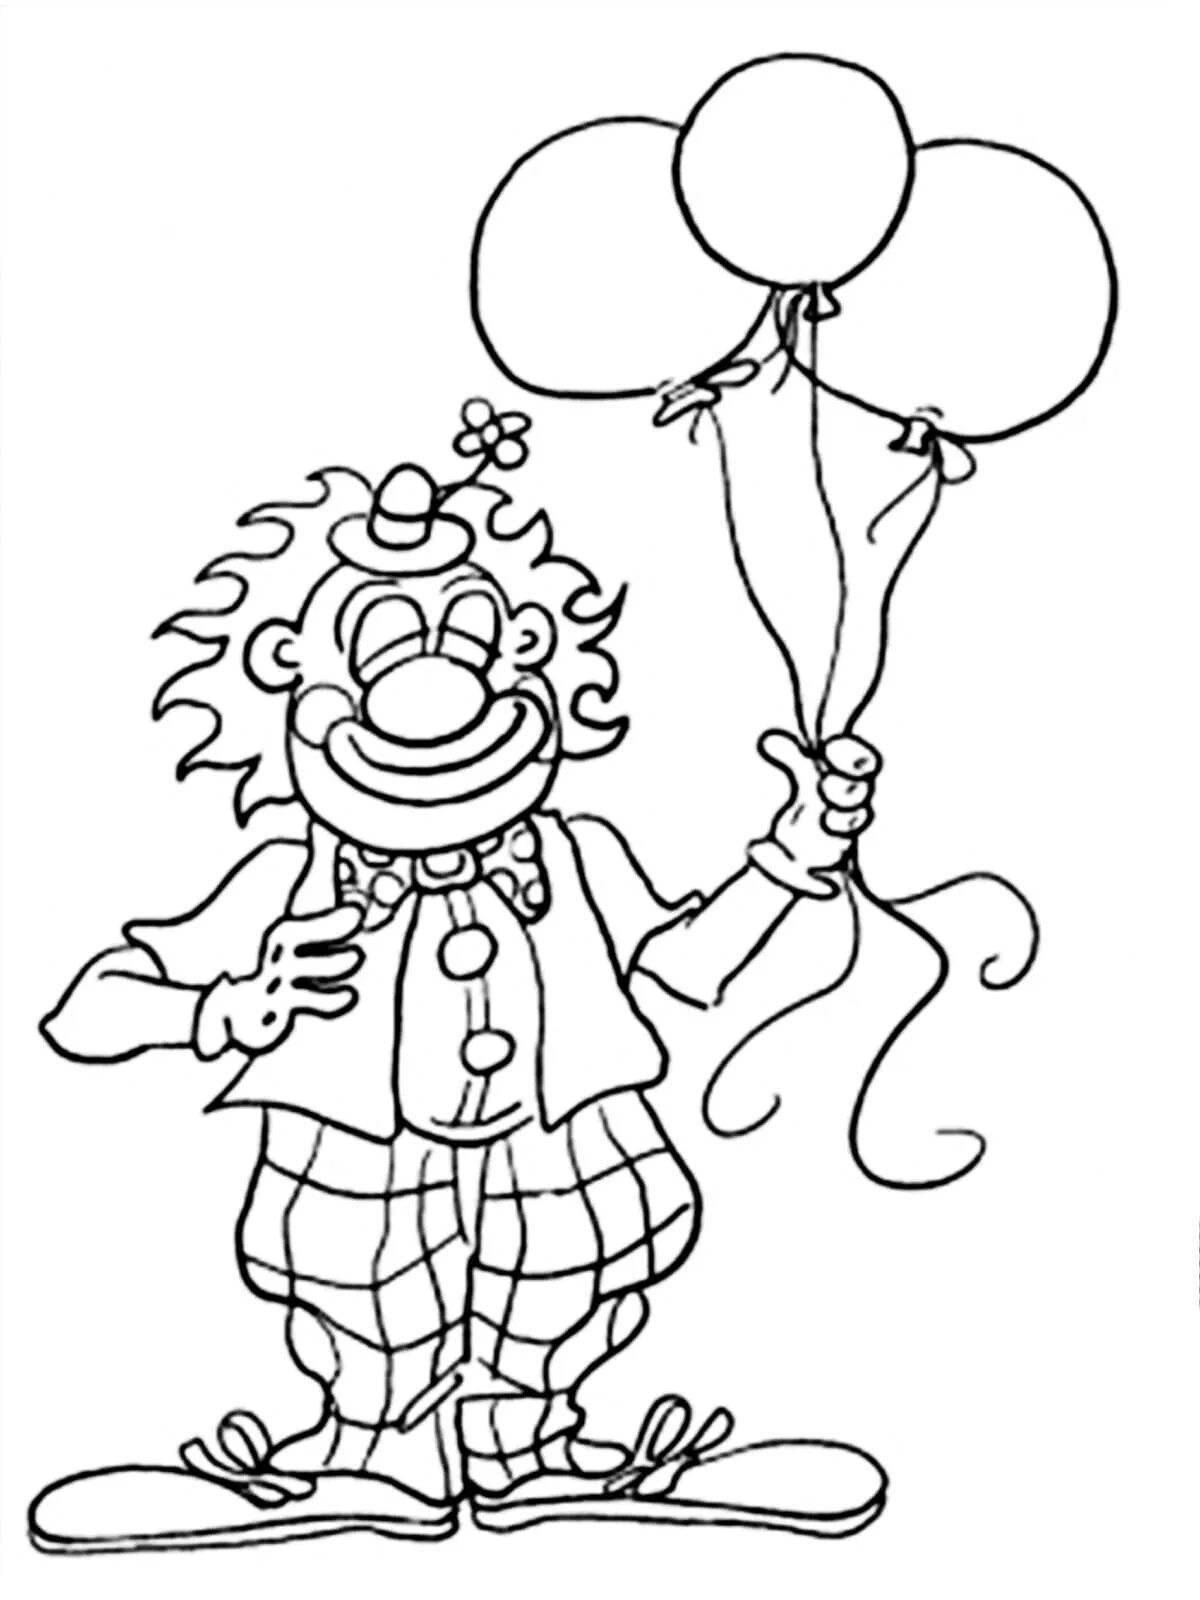 Party clown with balloons